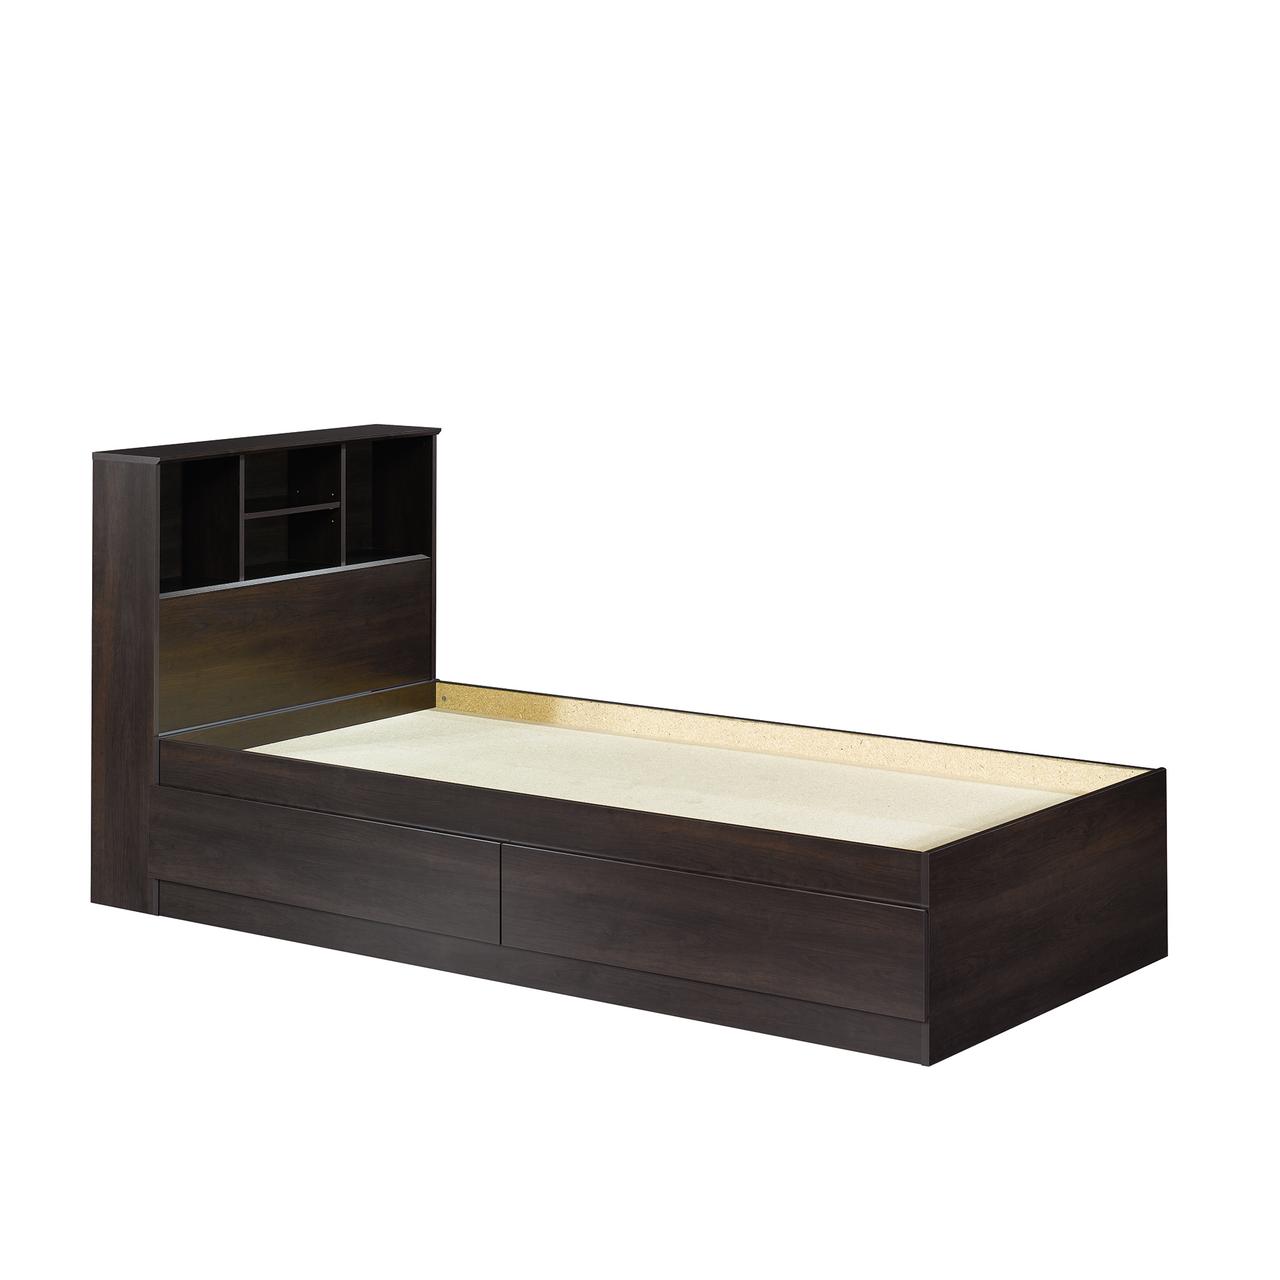 Your Zone Storage Bed with Bookcase Headboard, Twin, Espresso Finish - image 2 of 9